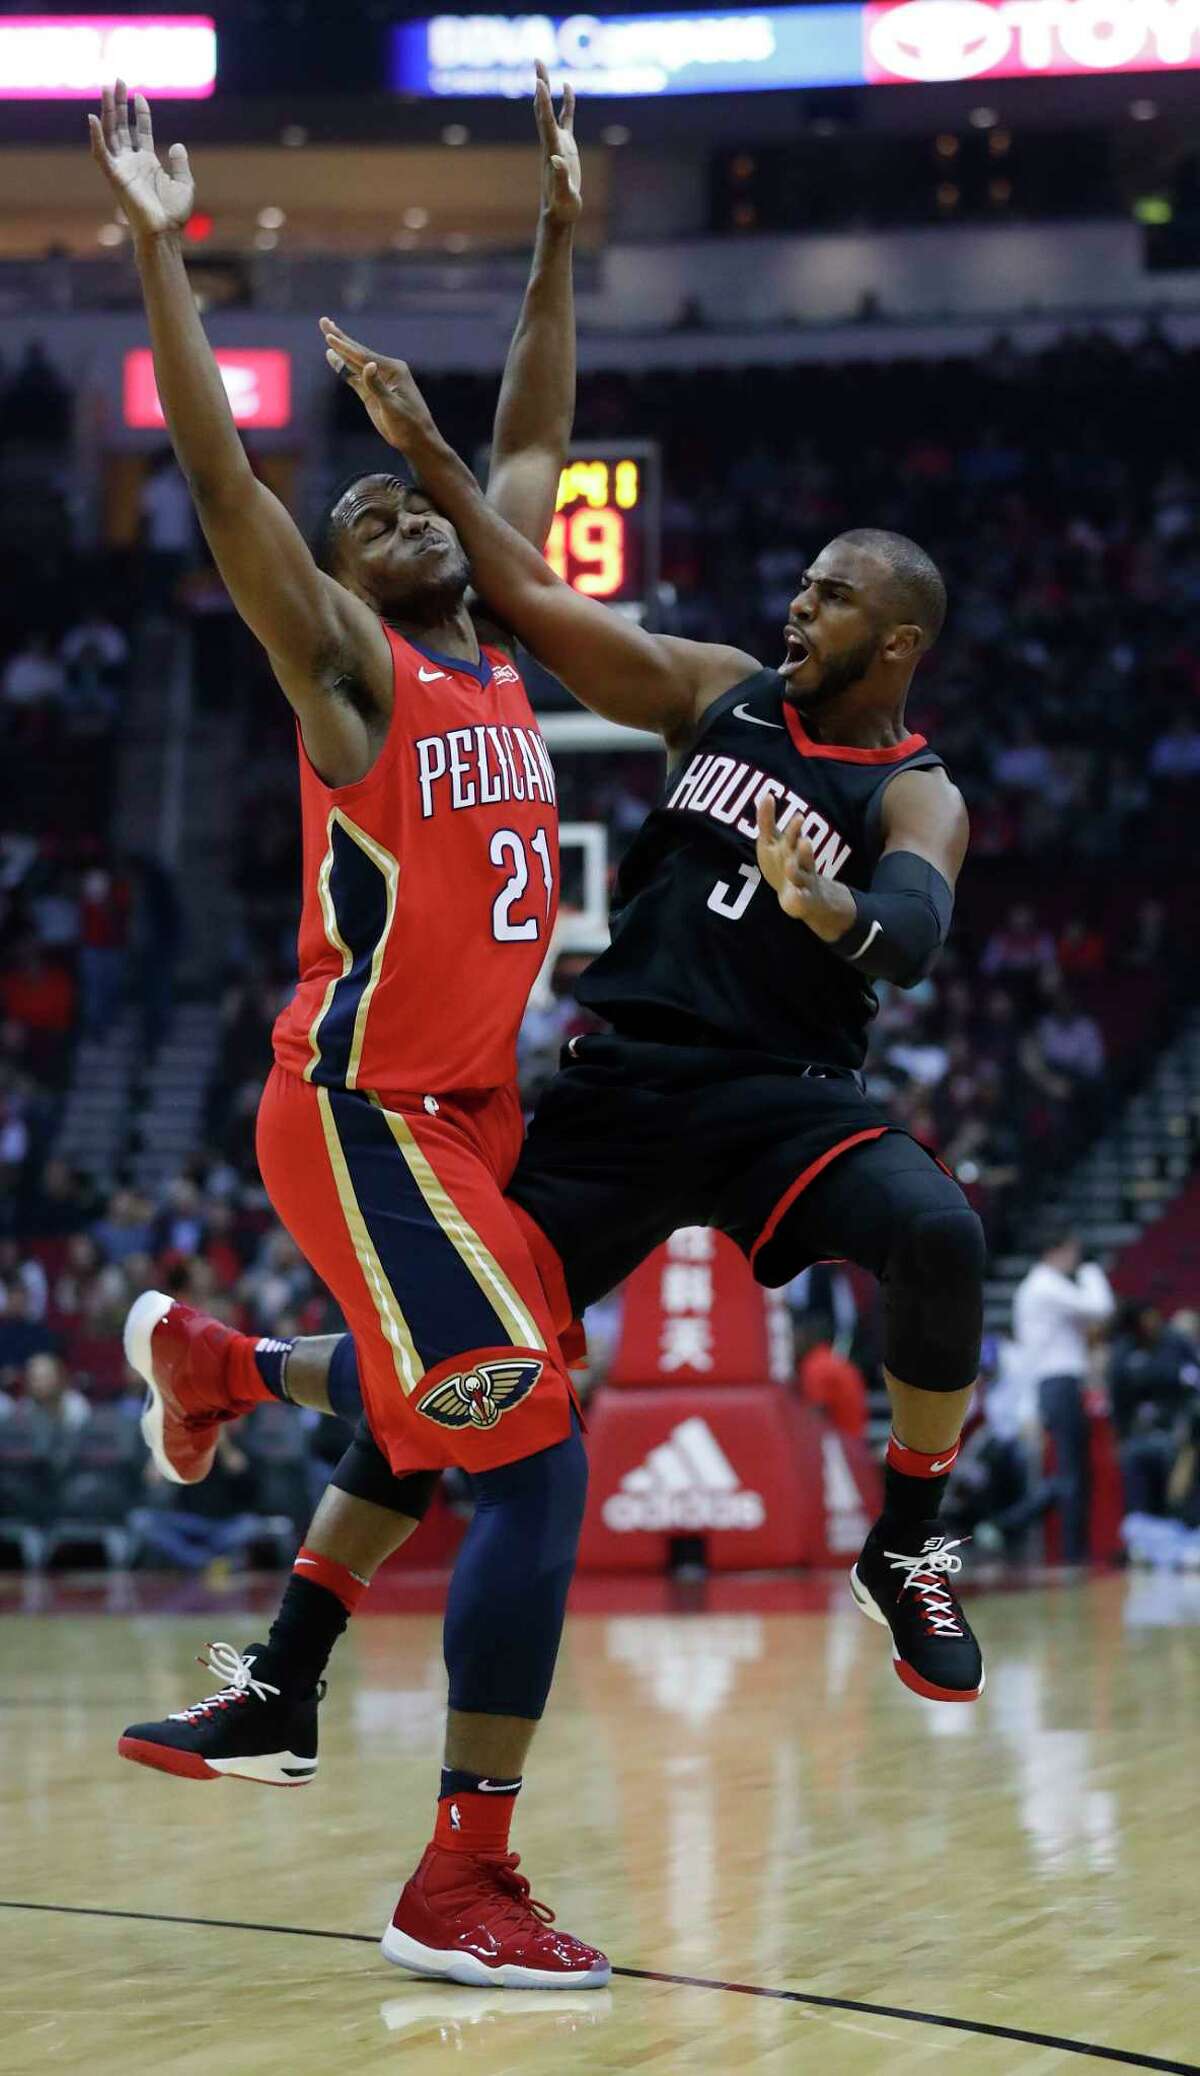 Houston Rockets guard Chris Paul (3) tries to shoot a three-pointer over New Orleans Pelicans forward Darius Miller (21) during the first half of an NBA game at Toyota Center, Monday, Dec. 11, 2017, in Houston.